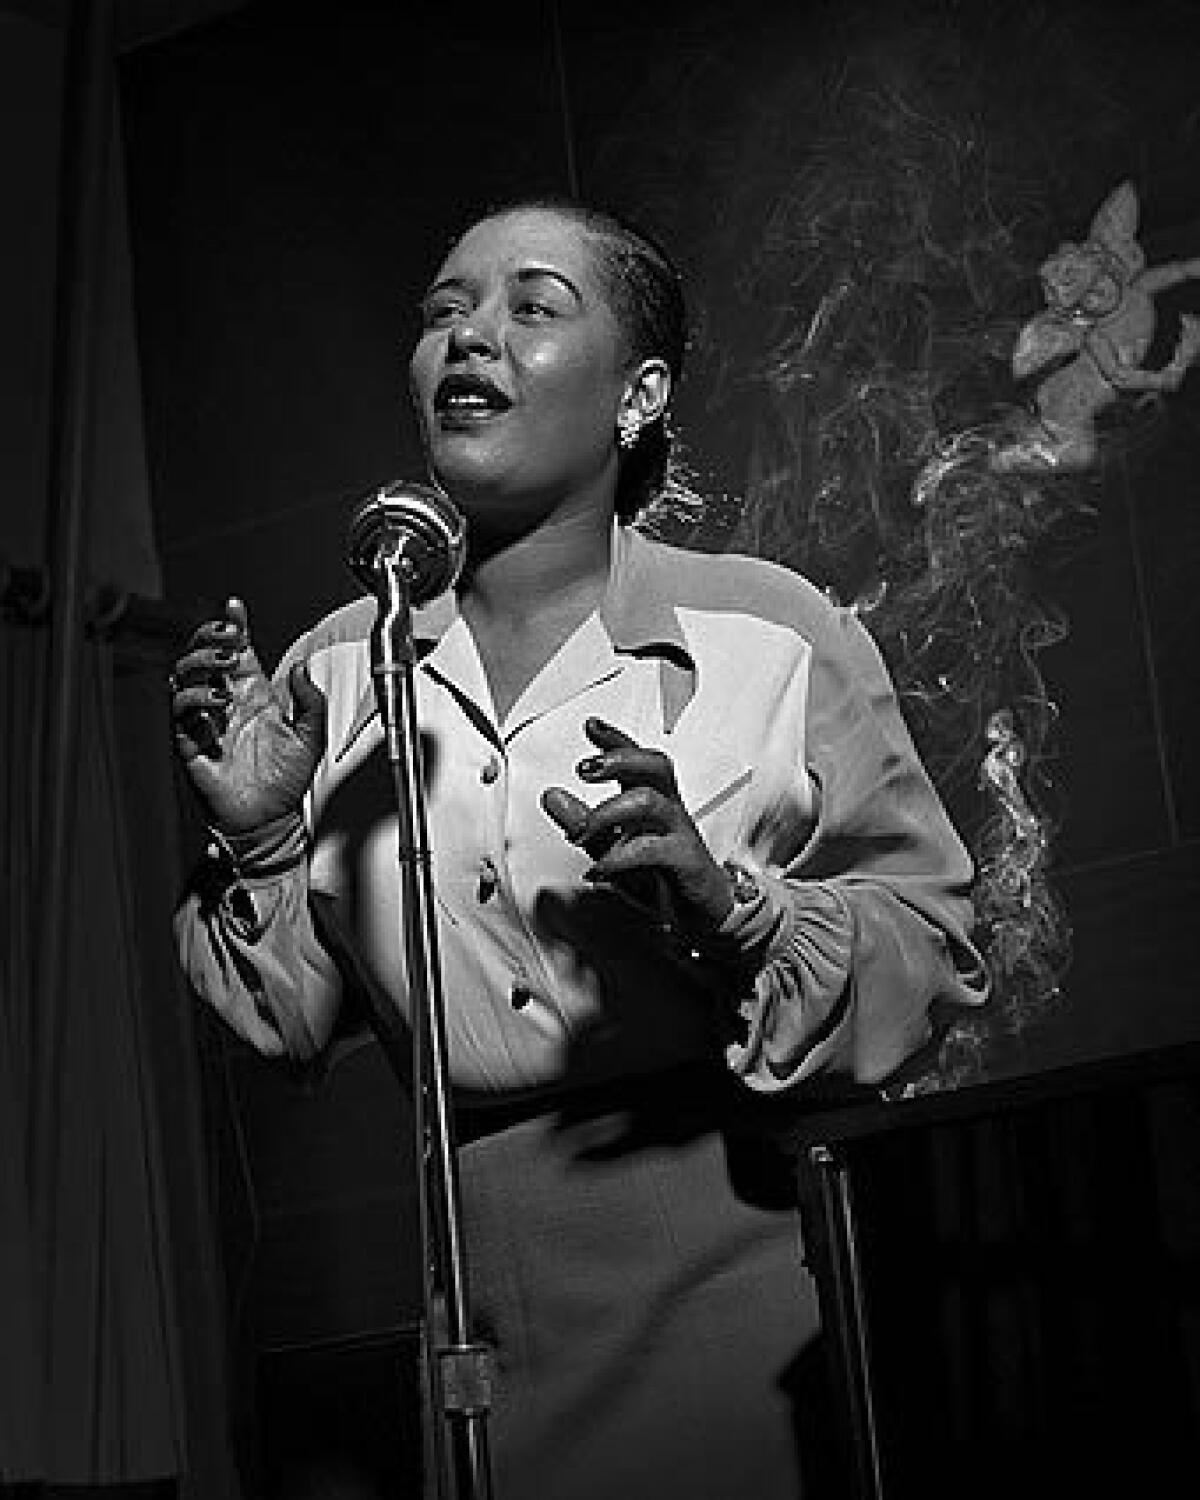 Billie Holiday performs at a microphone in New York.